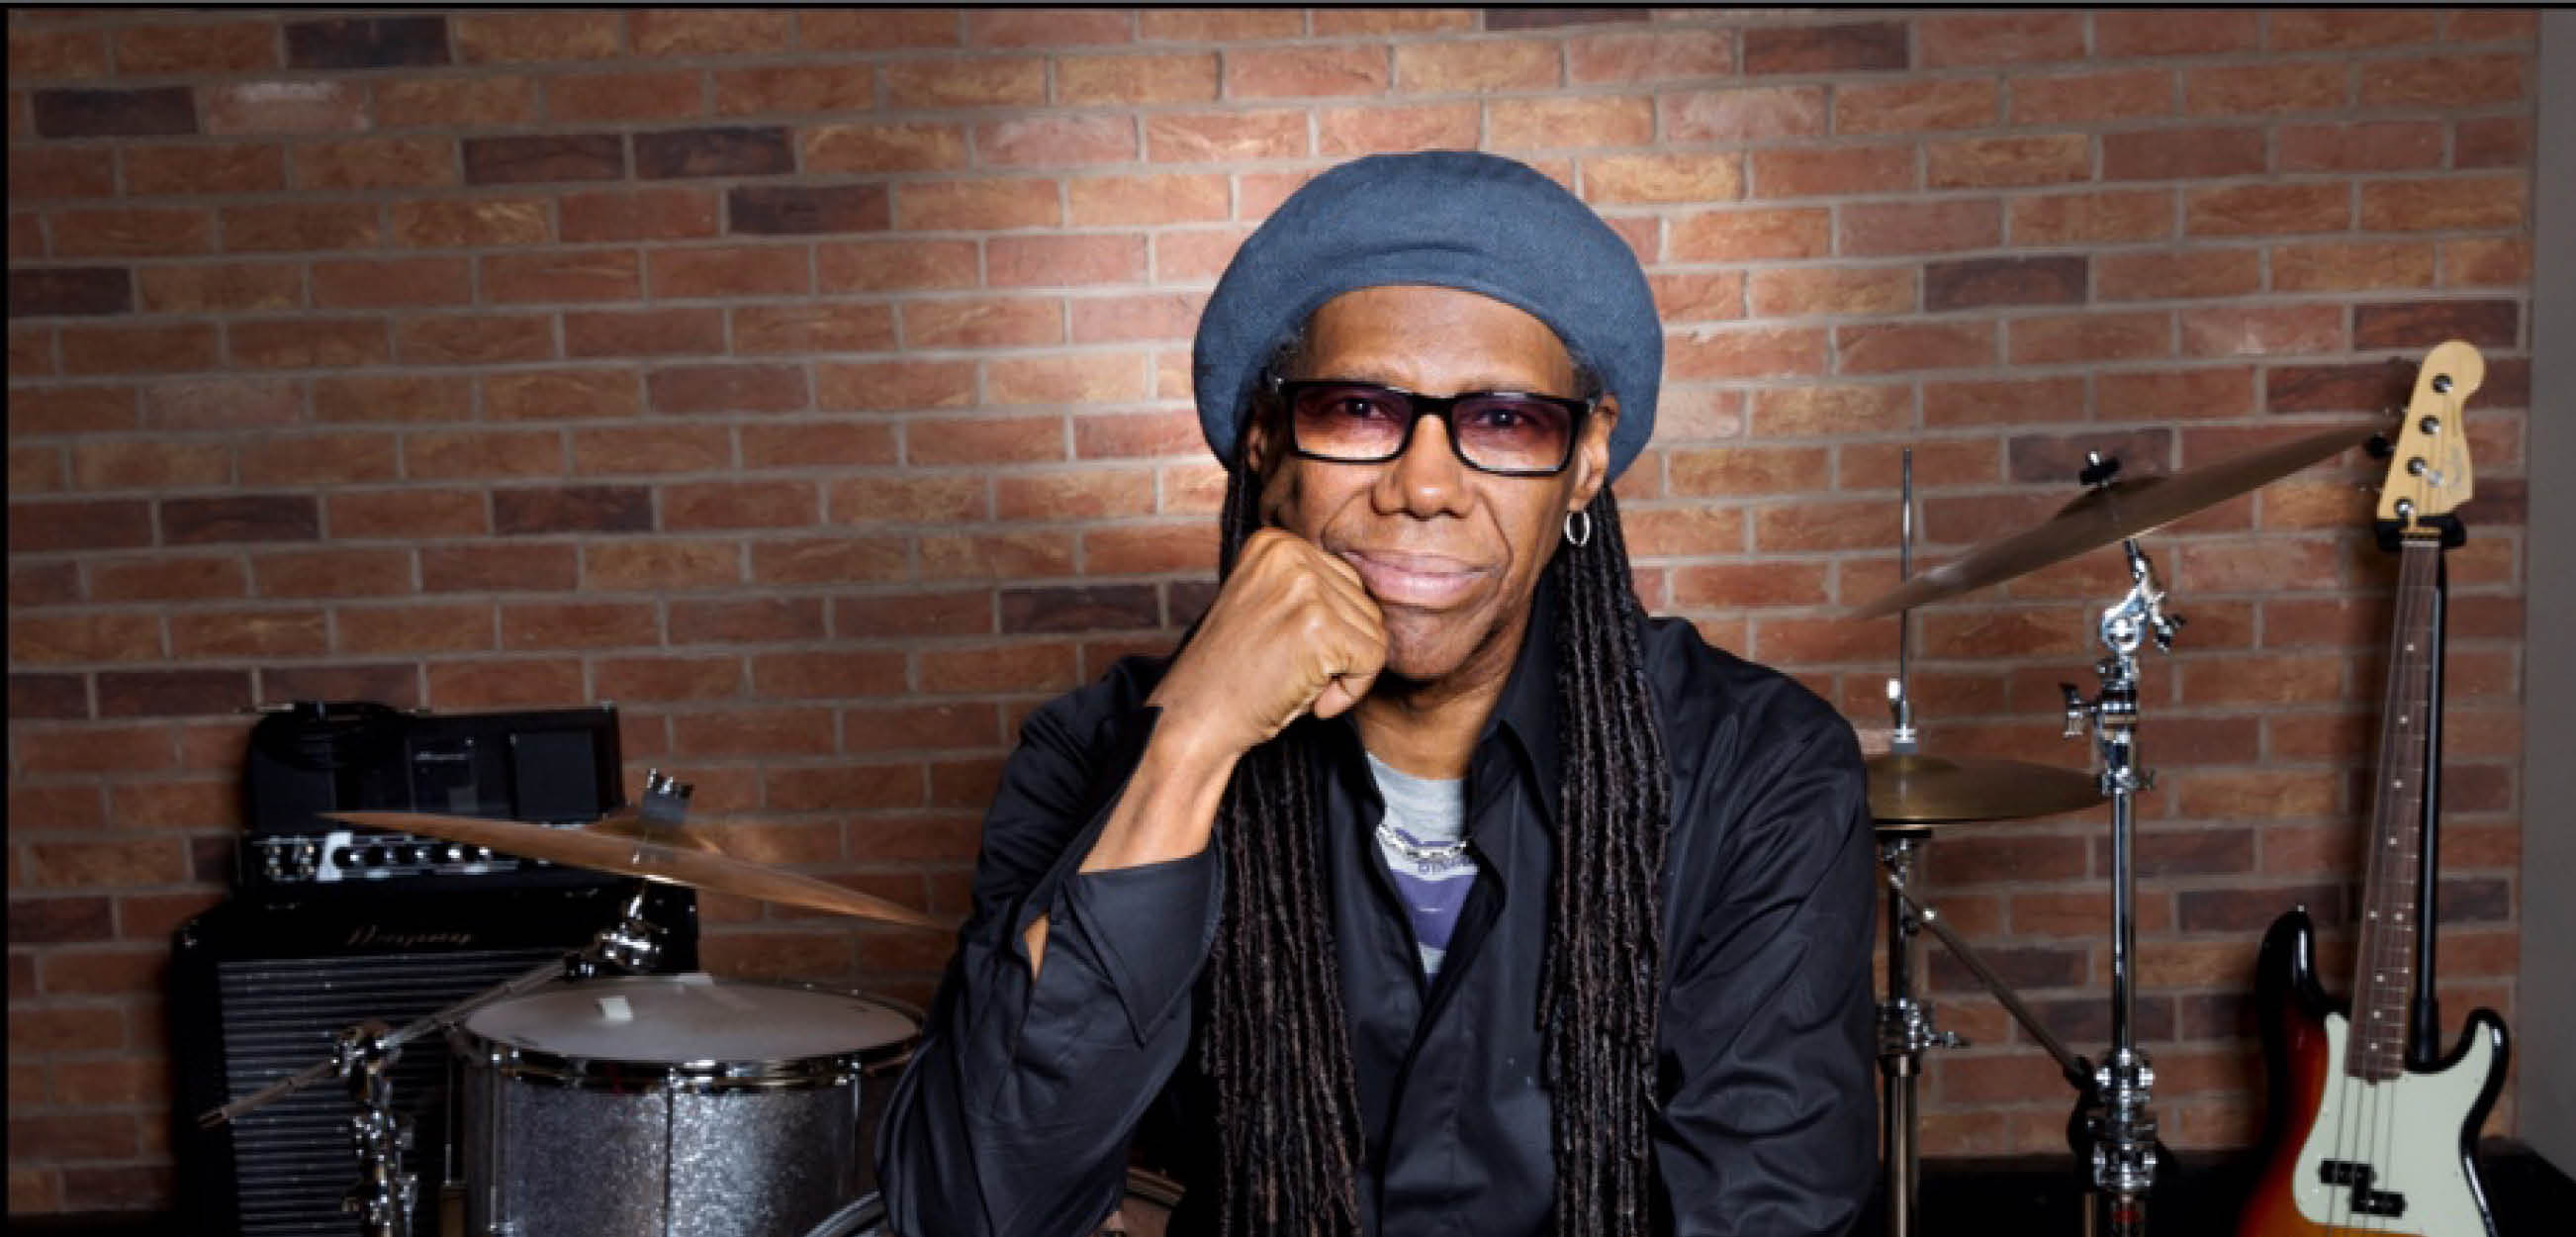 hampton court festival, music, live music, whats on, nile rogers, hampton court, surrey, guide to, guide, surrey